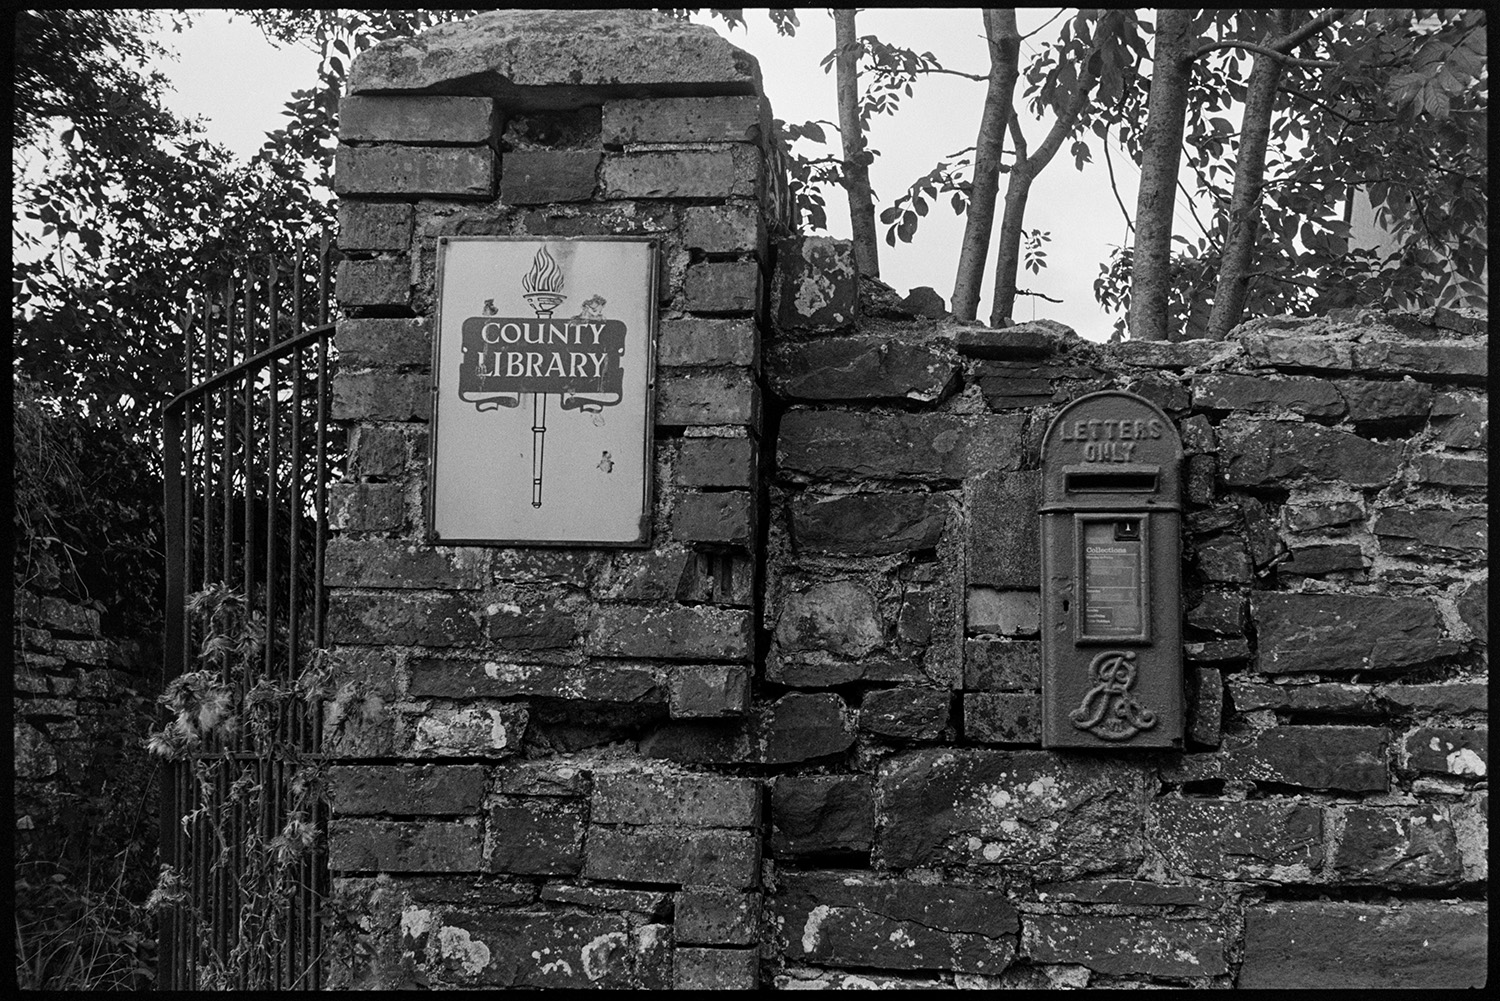 Letter box in wall, old. 
[A post box set into a stone and brick wall by a gateway with a sign for a Country Library.]